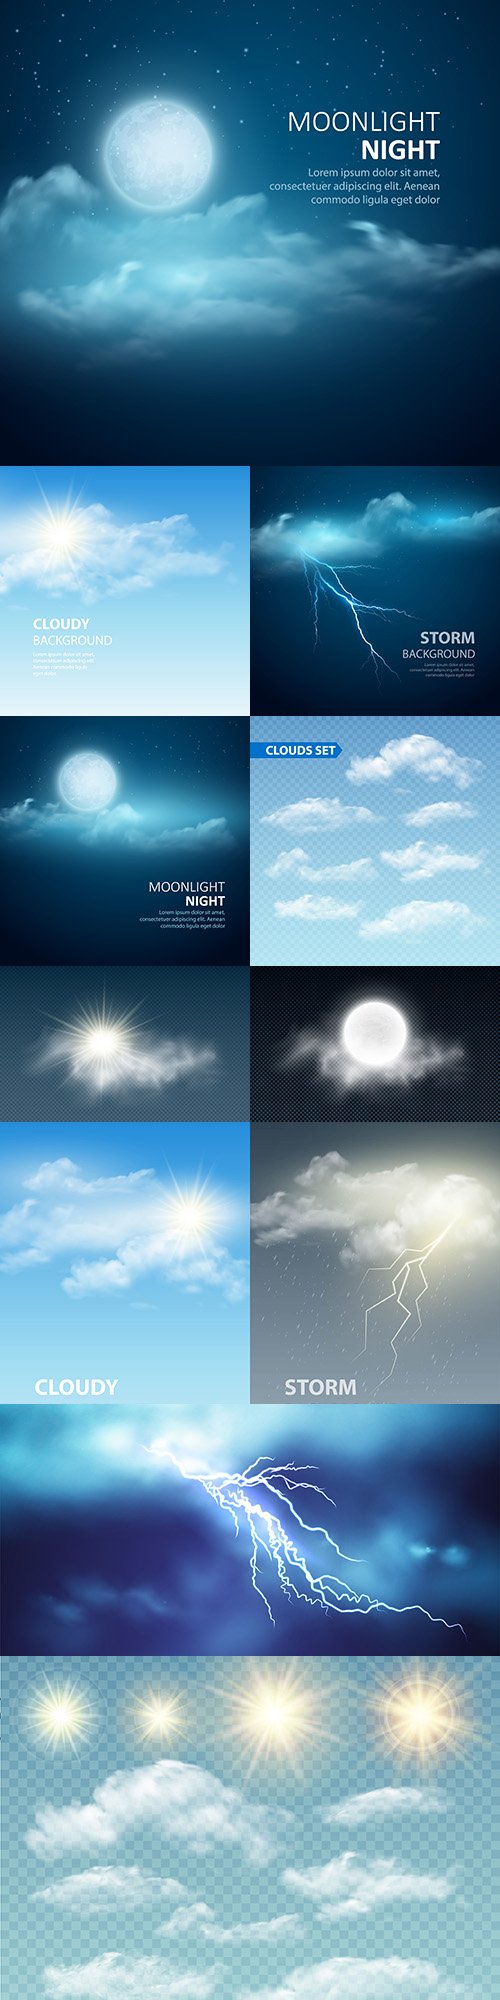 Realistic sun with clouds and night sky illustrations